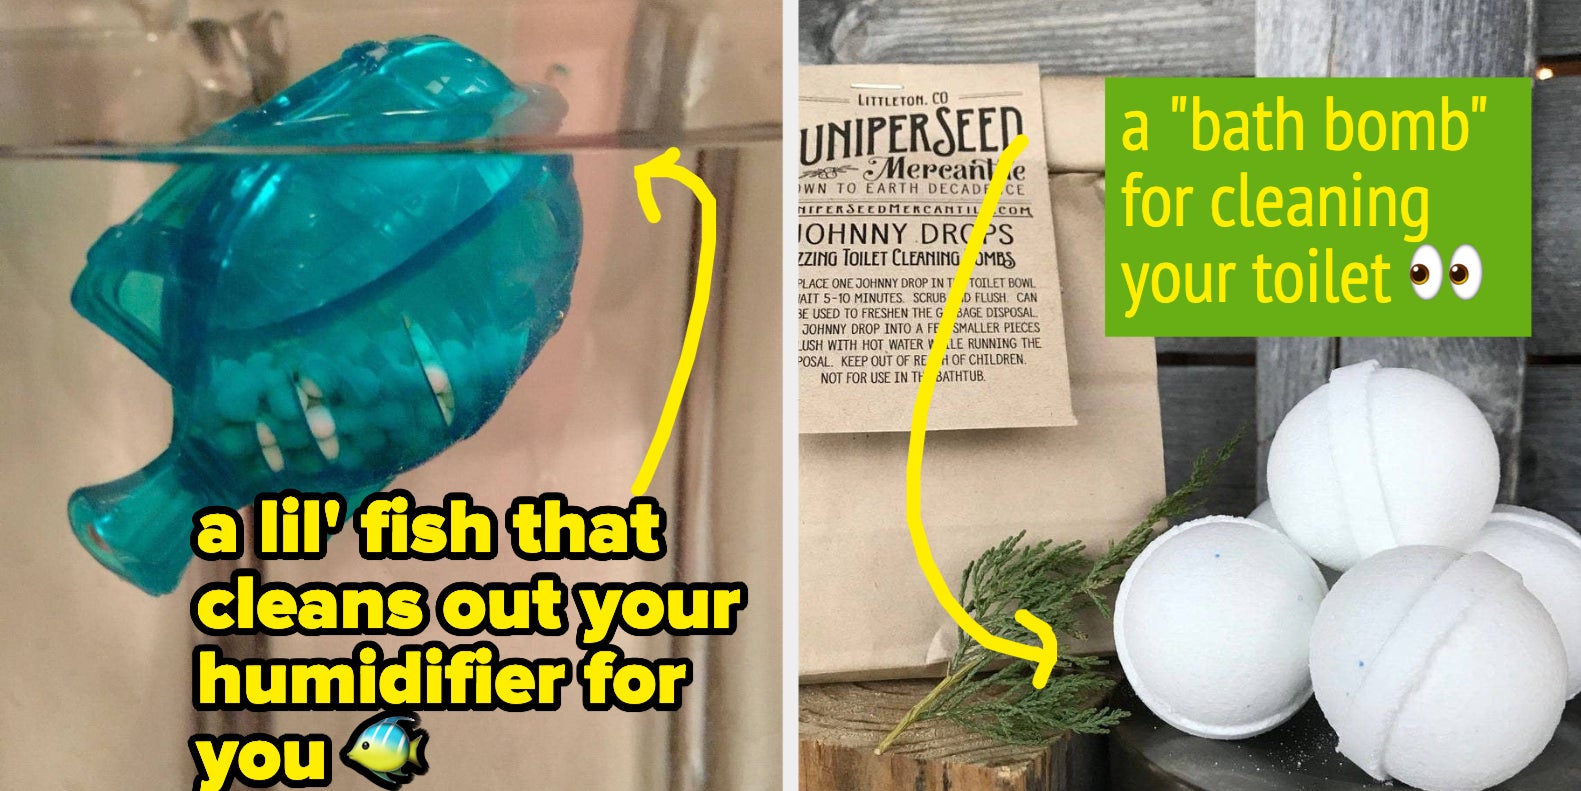 32 Alternative Uses For Cleaning Supplies You Already Have On Hand